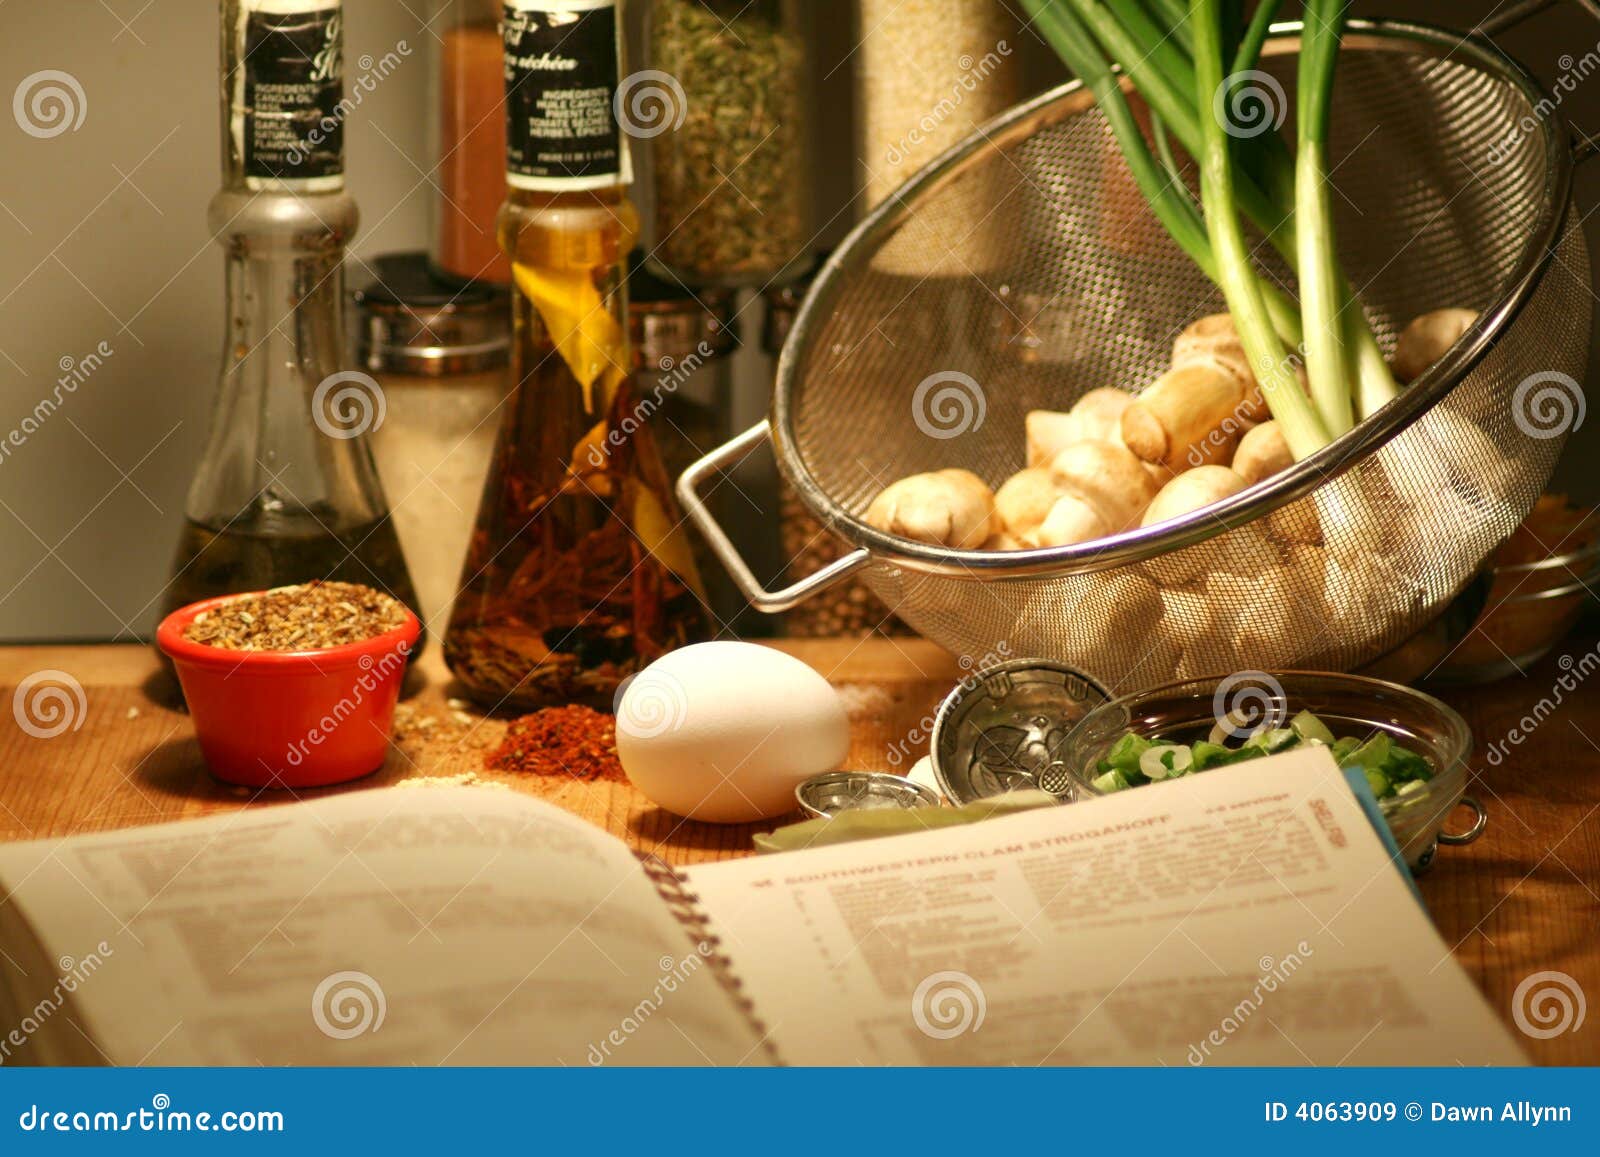 Cooking stock image. Image of lunch, meal, cook, homemade - 4063909